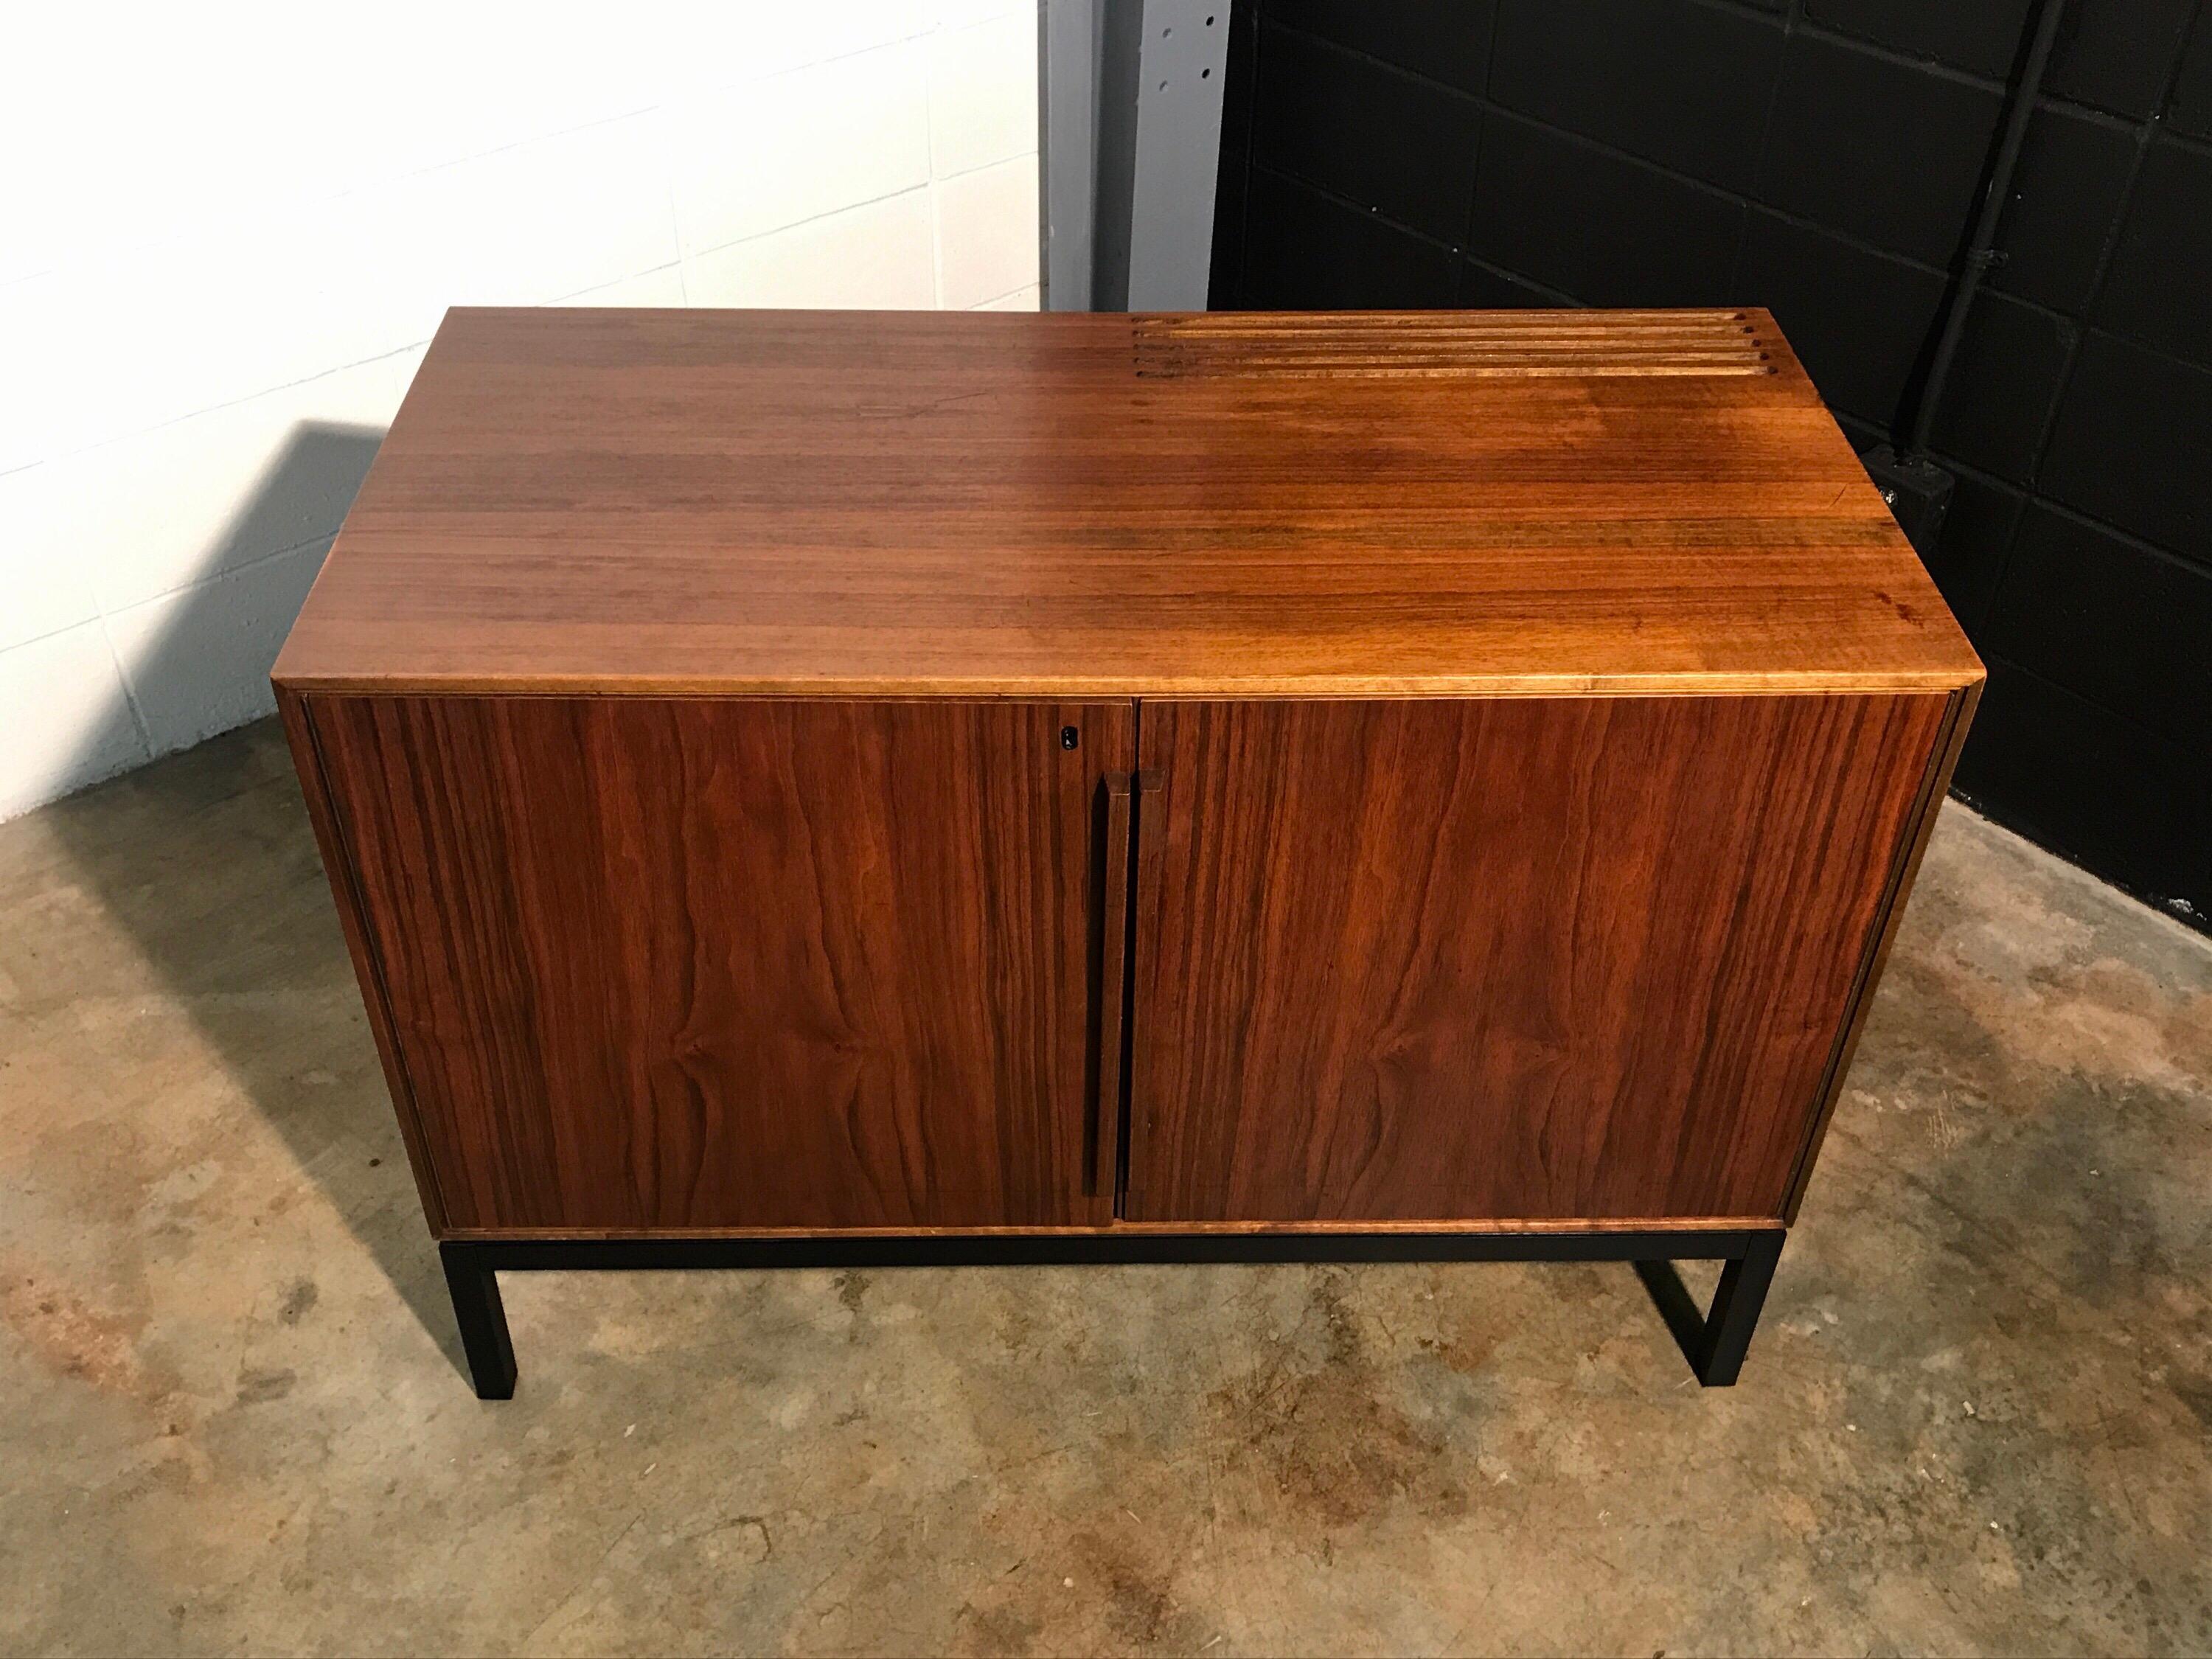 Danish Mid-Century Modern Cabinet with Built-In Refrigerator